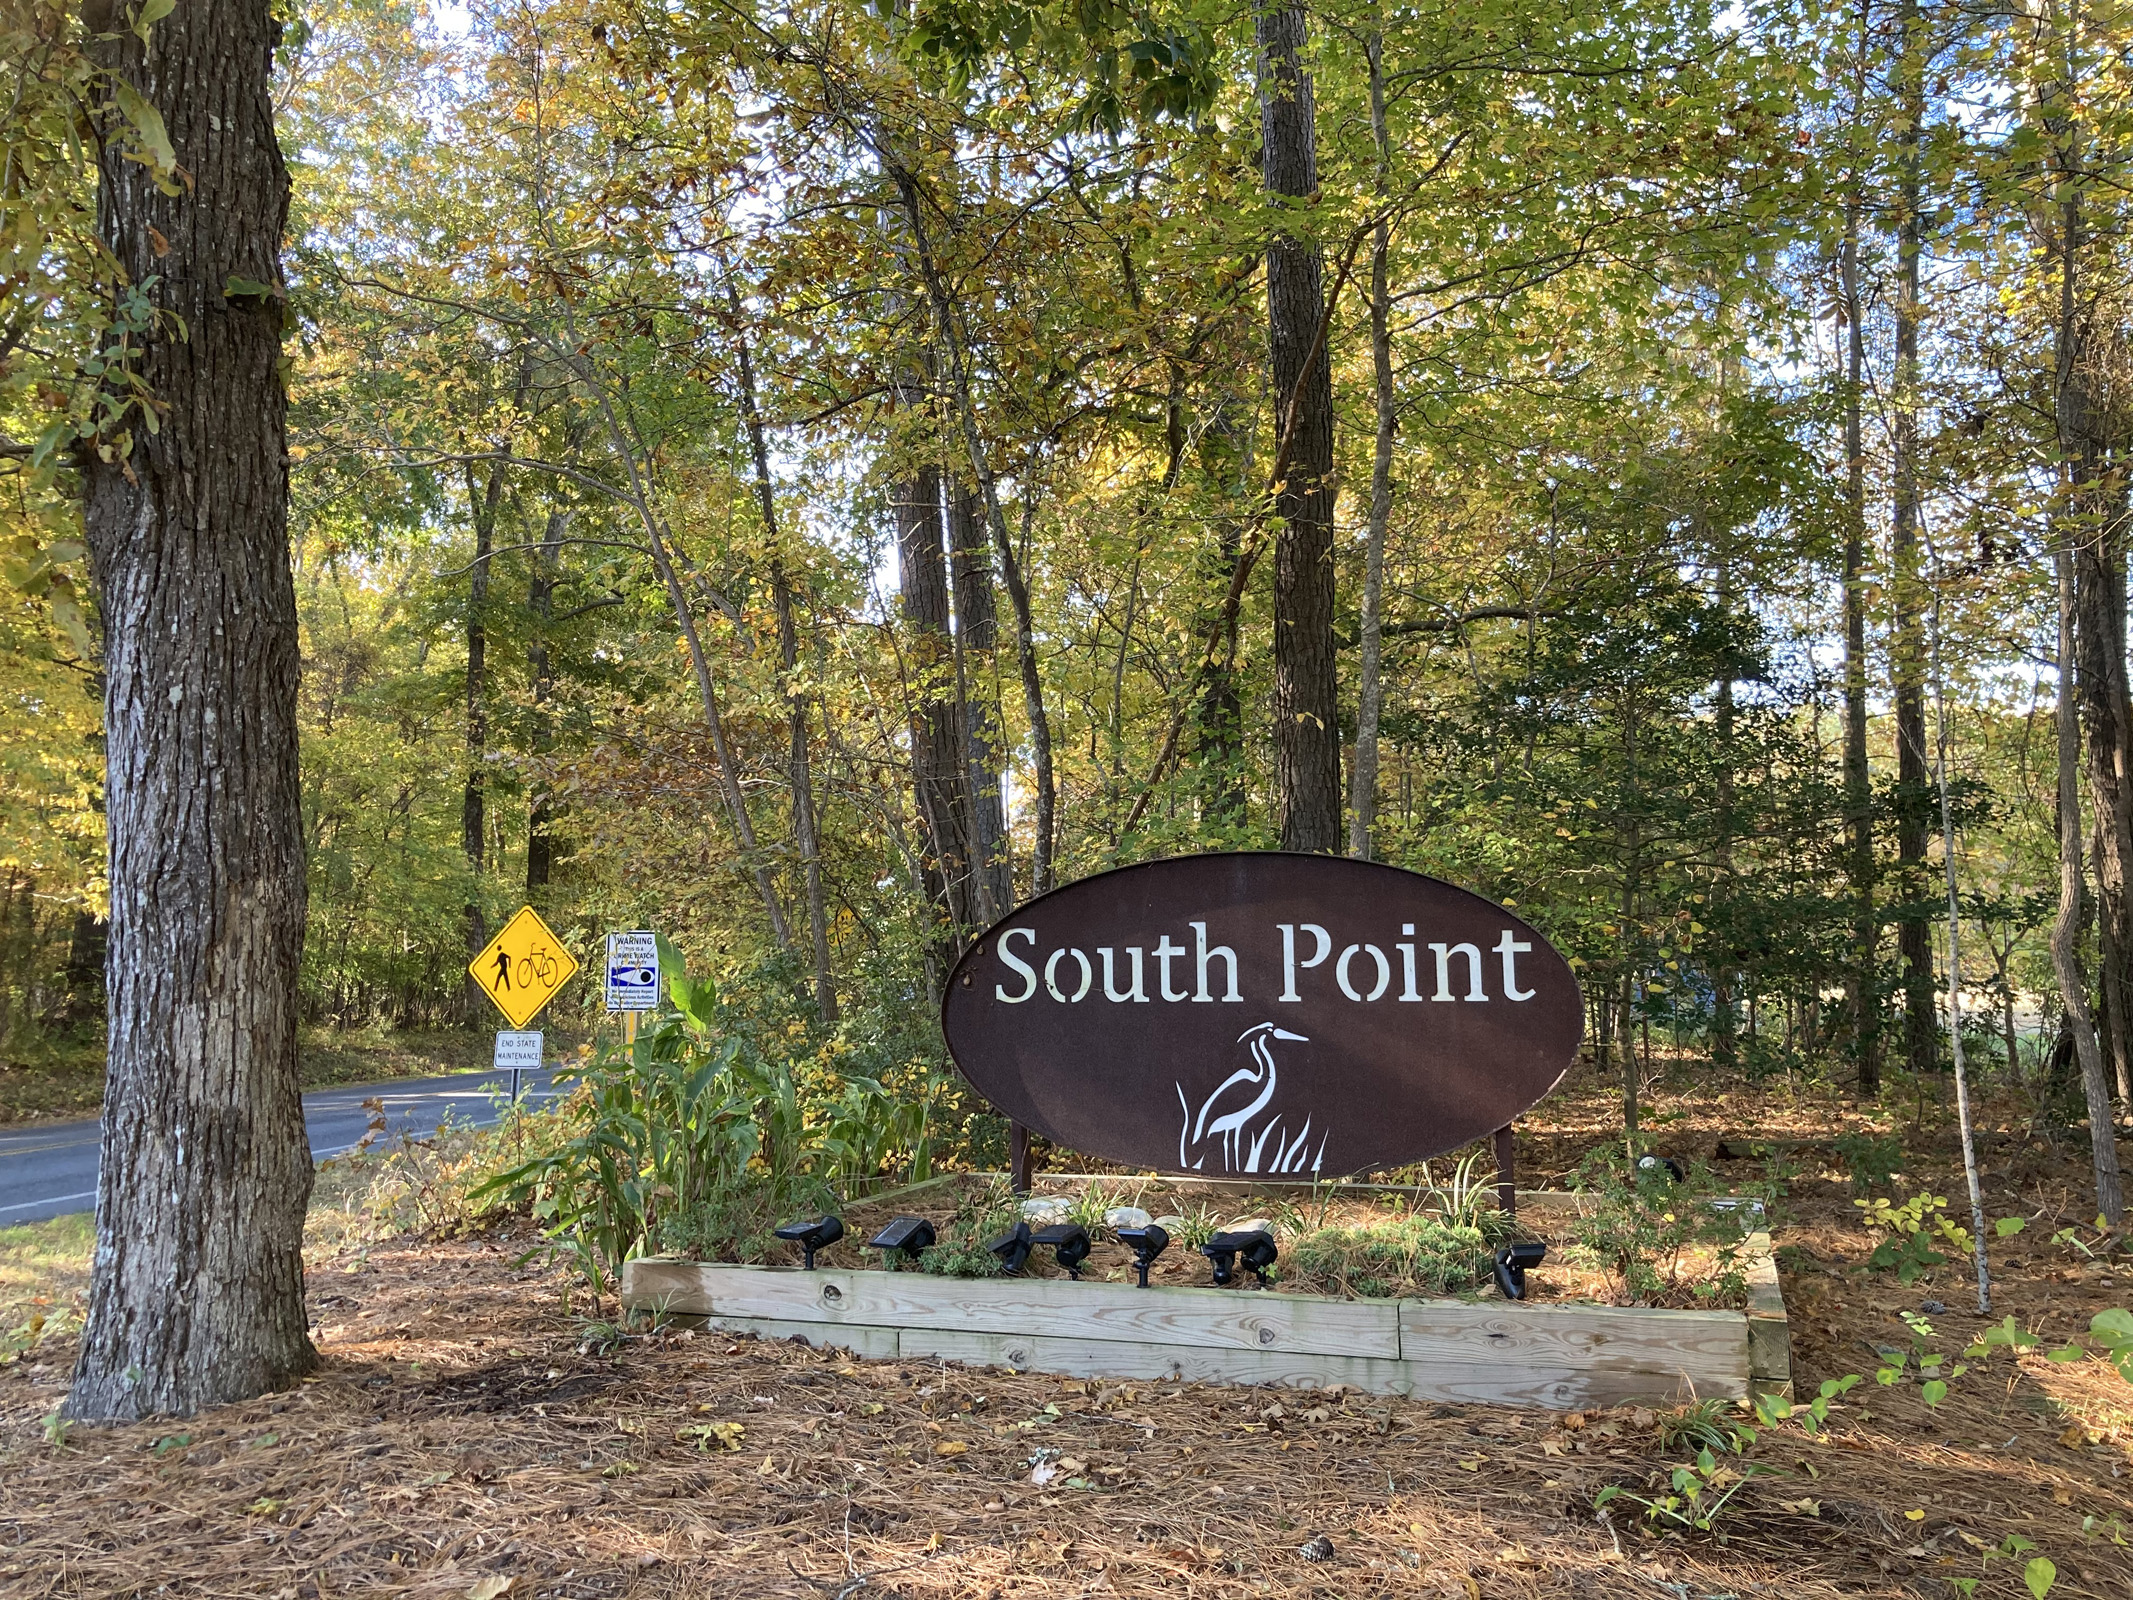 South Point entrance sign.